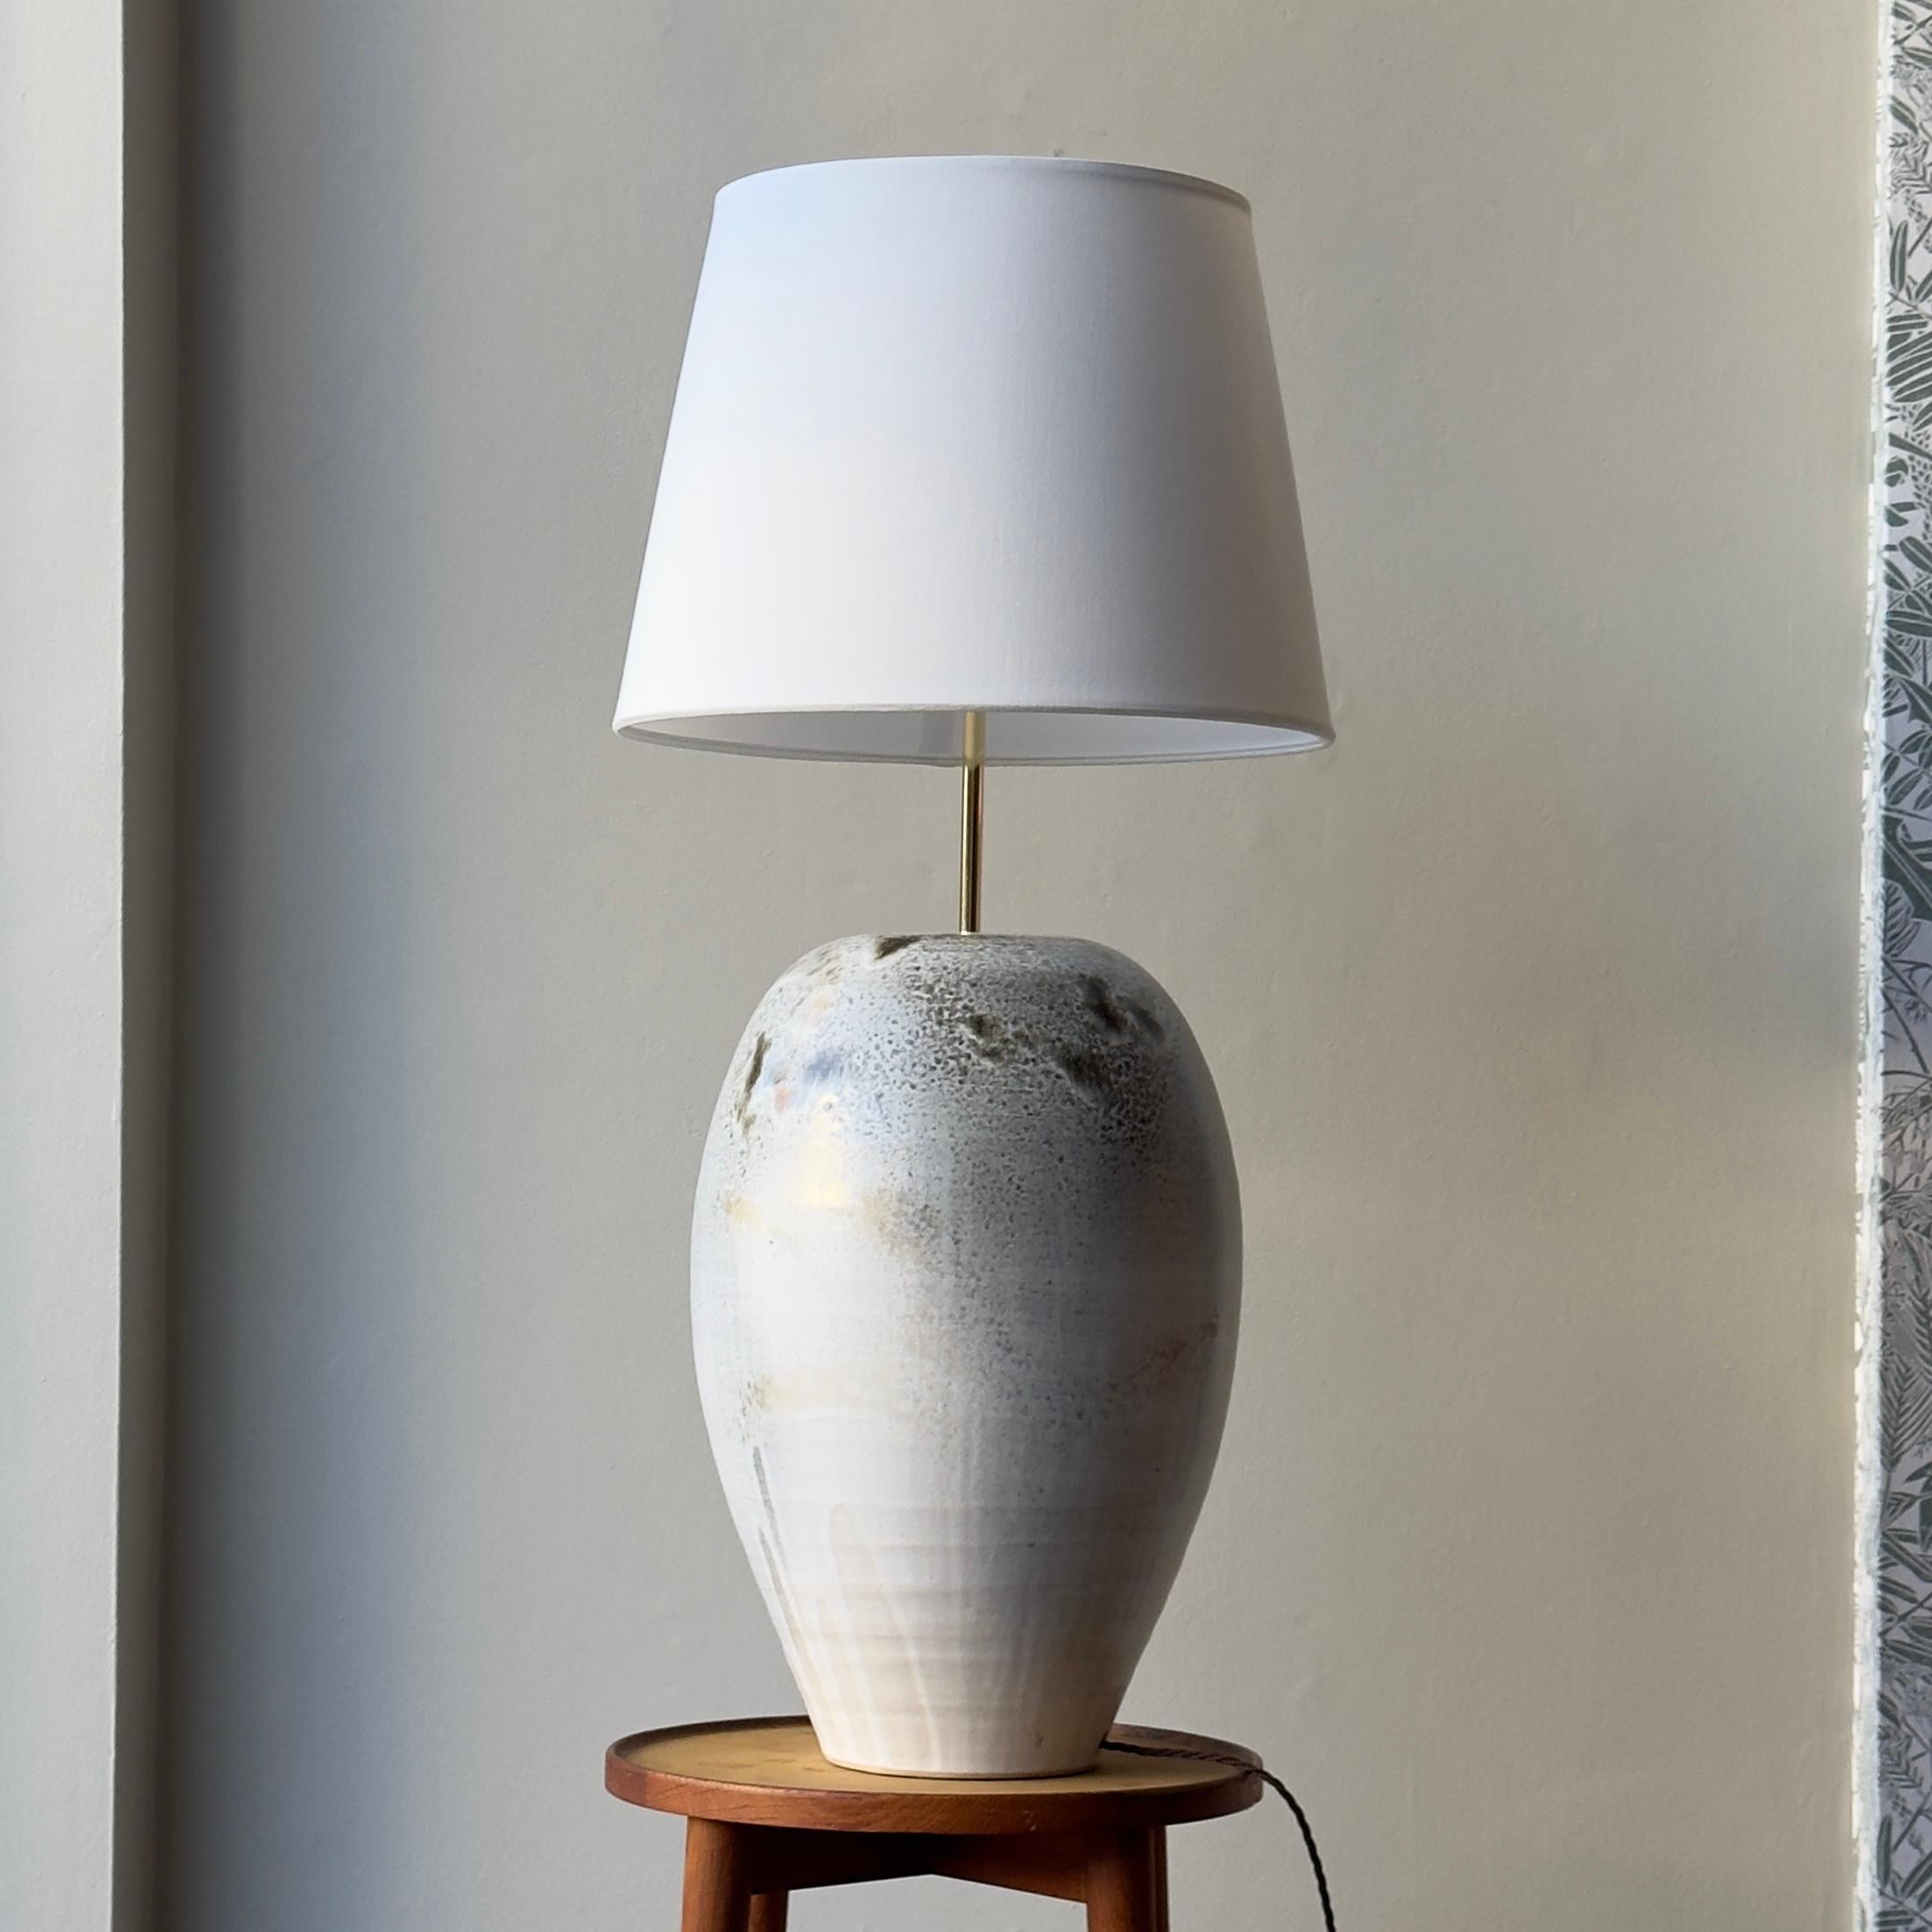 This stoneware lamp comes from the studio of K H Würtz, based near Horsens in eastern Jutland, Denmark.

Known internationally for their hand-thrown and hand-glazed ceramics they have produced bespoke collections for distinguished fine dining